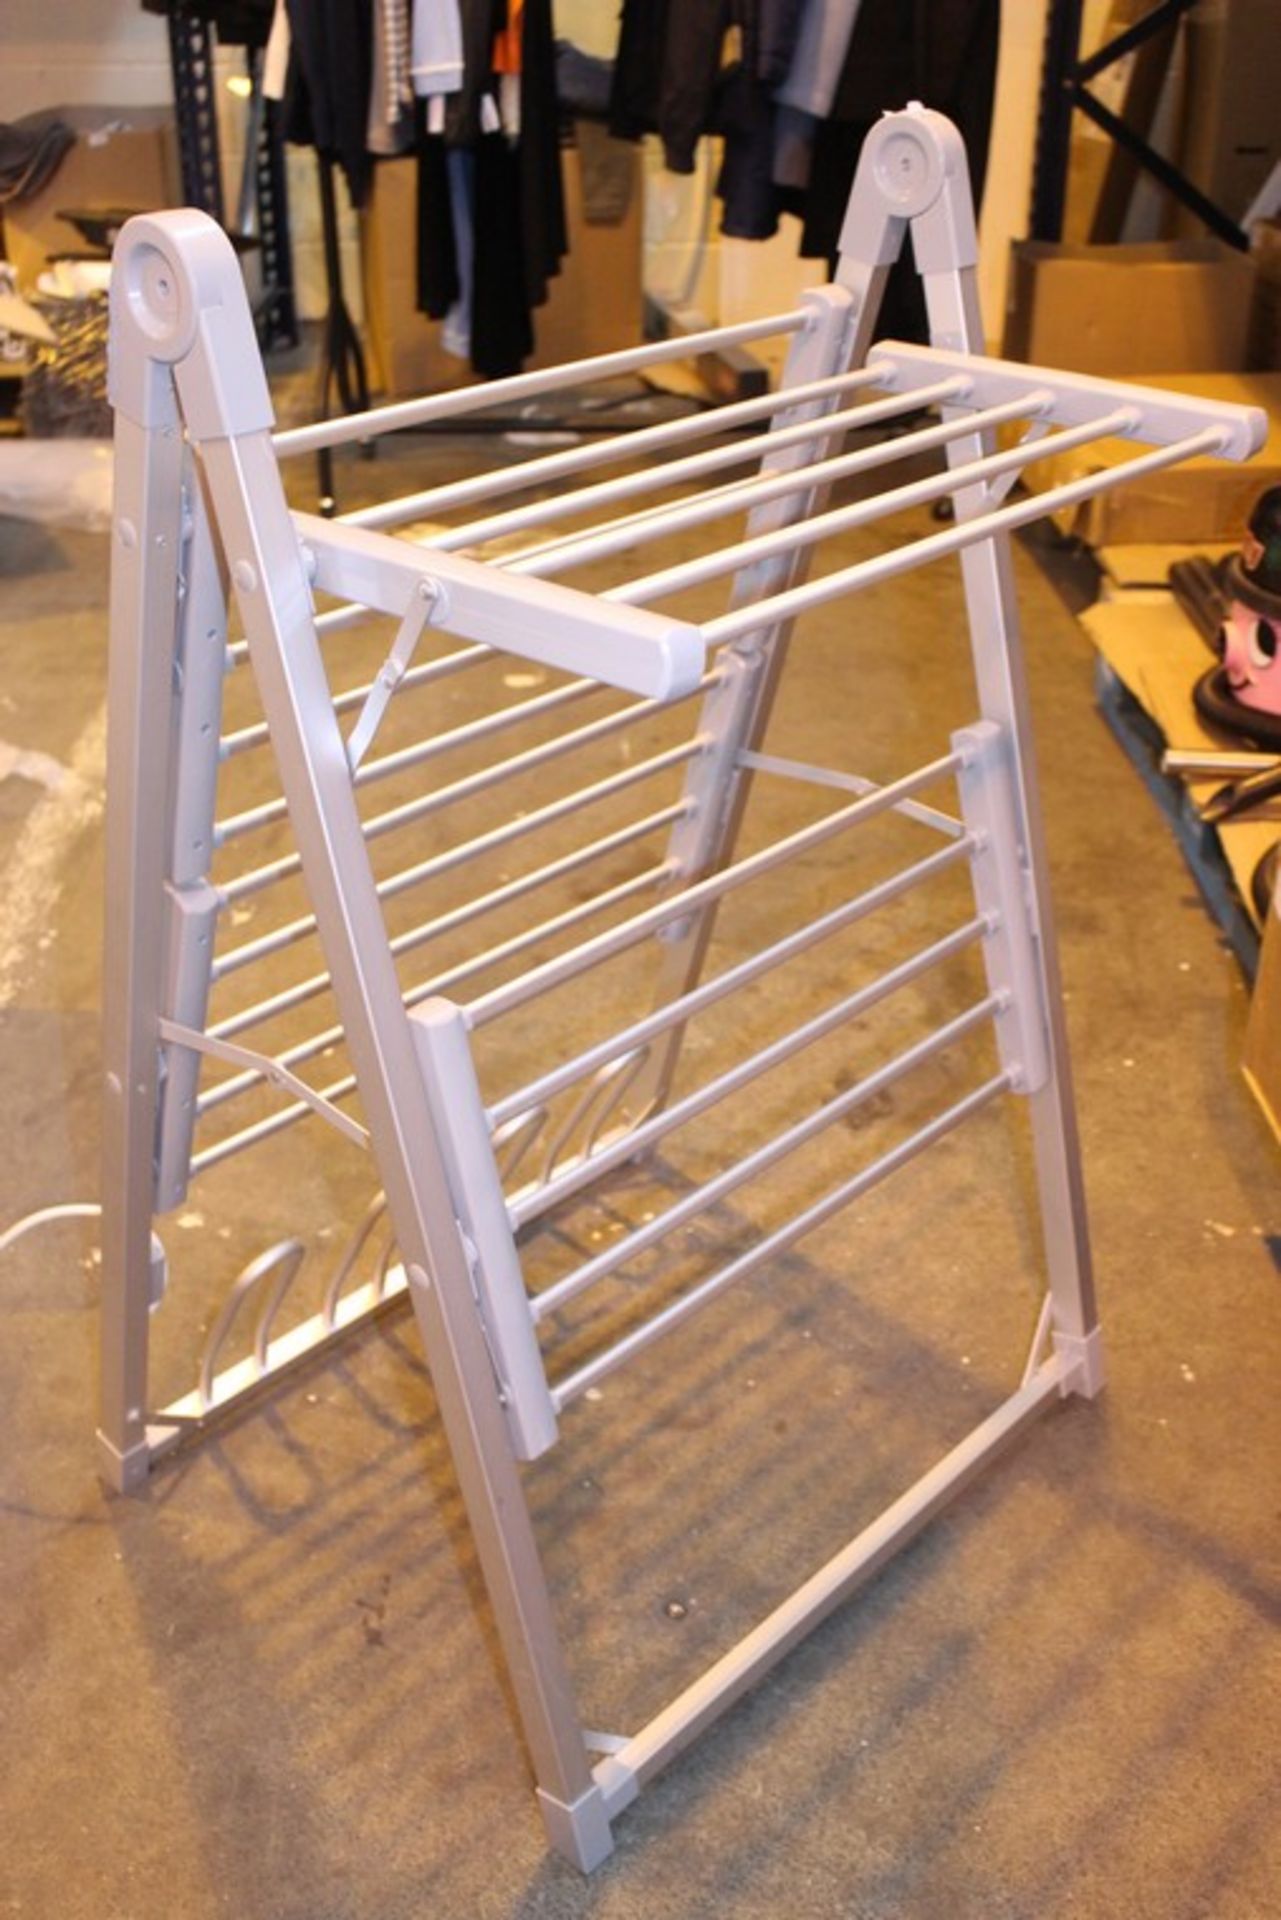 1 x BOXED ELECTRICALLY HEATED CLOTHES AIRER RRP £80 (17.2.17) *PLEASE NOTE THAT THE BID PRICE IS